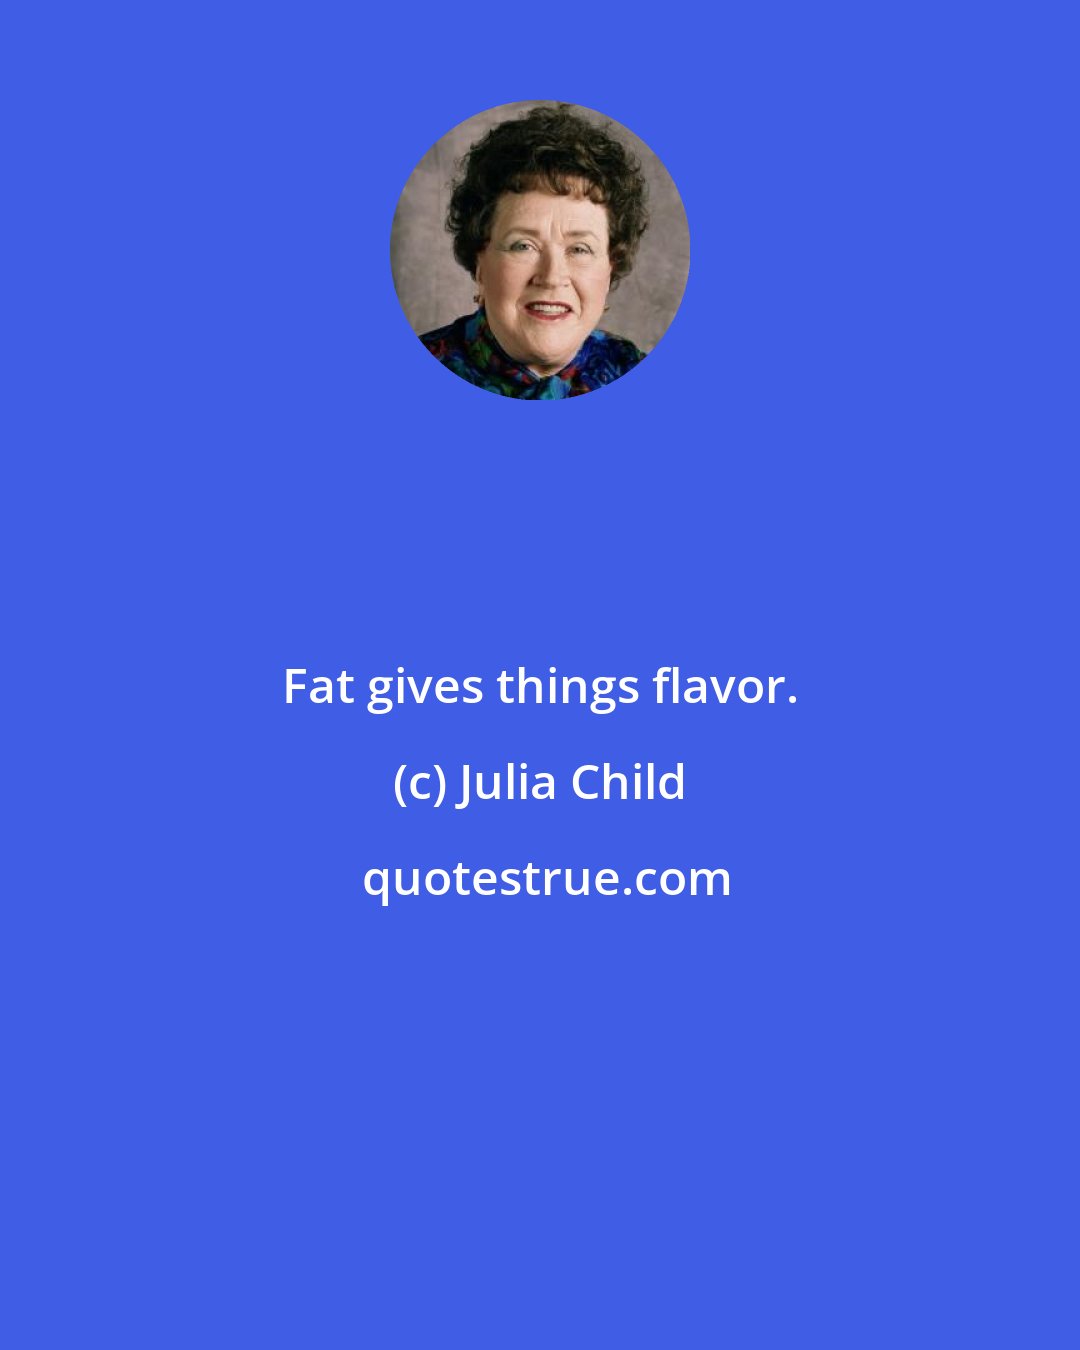 Julia Child: Fat gives things flavor.